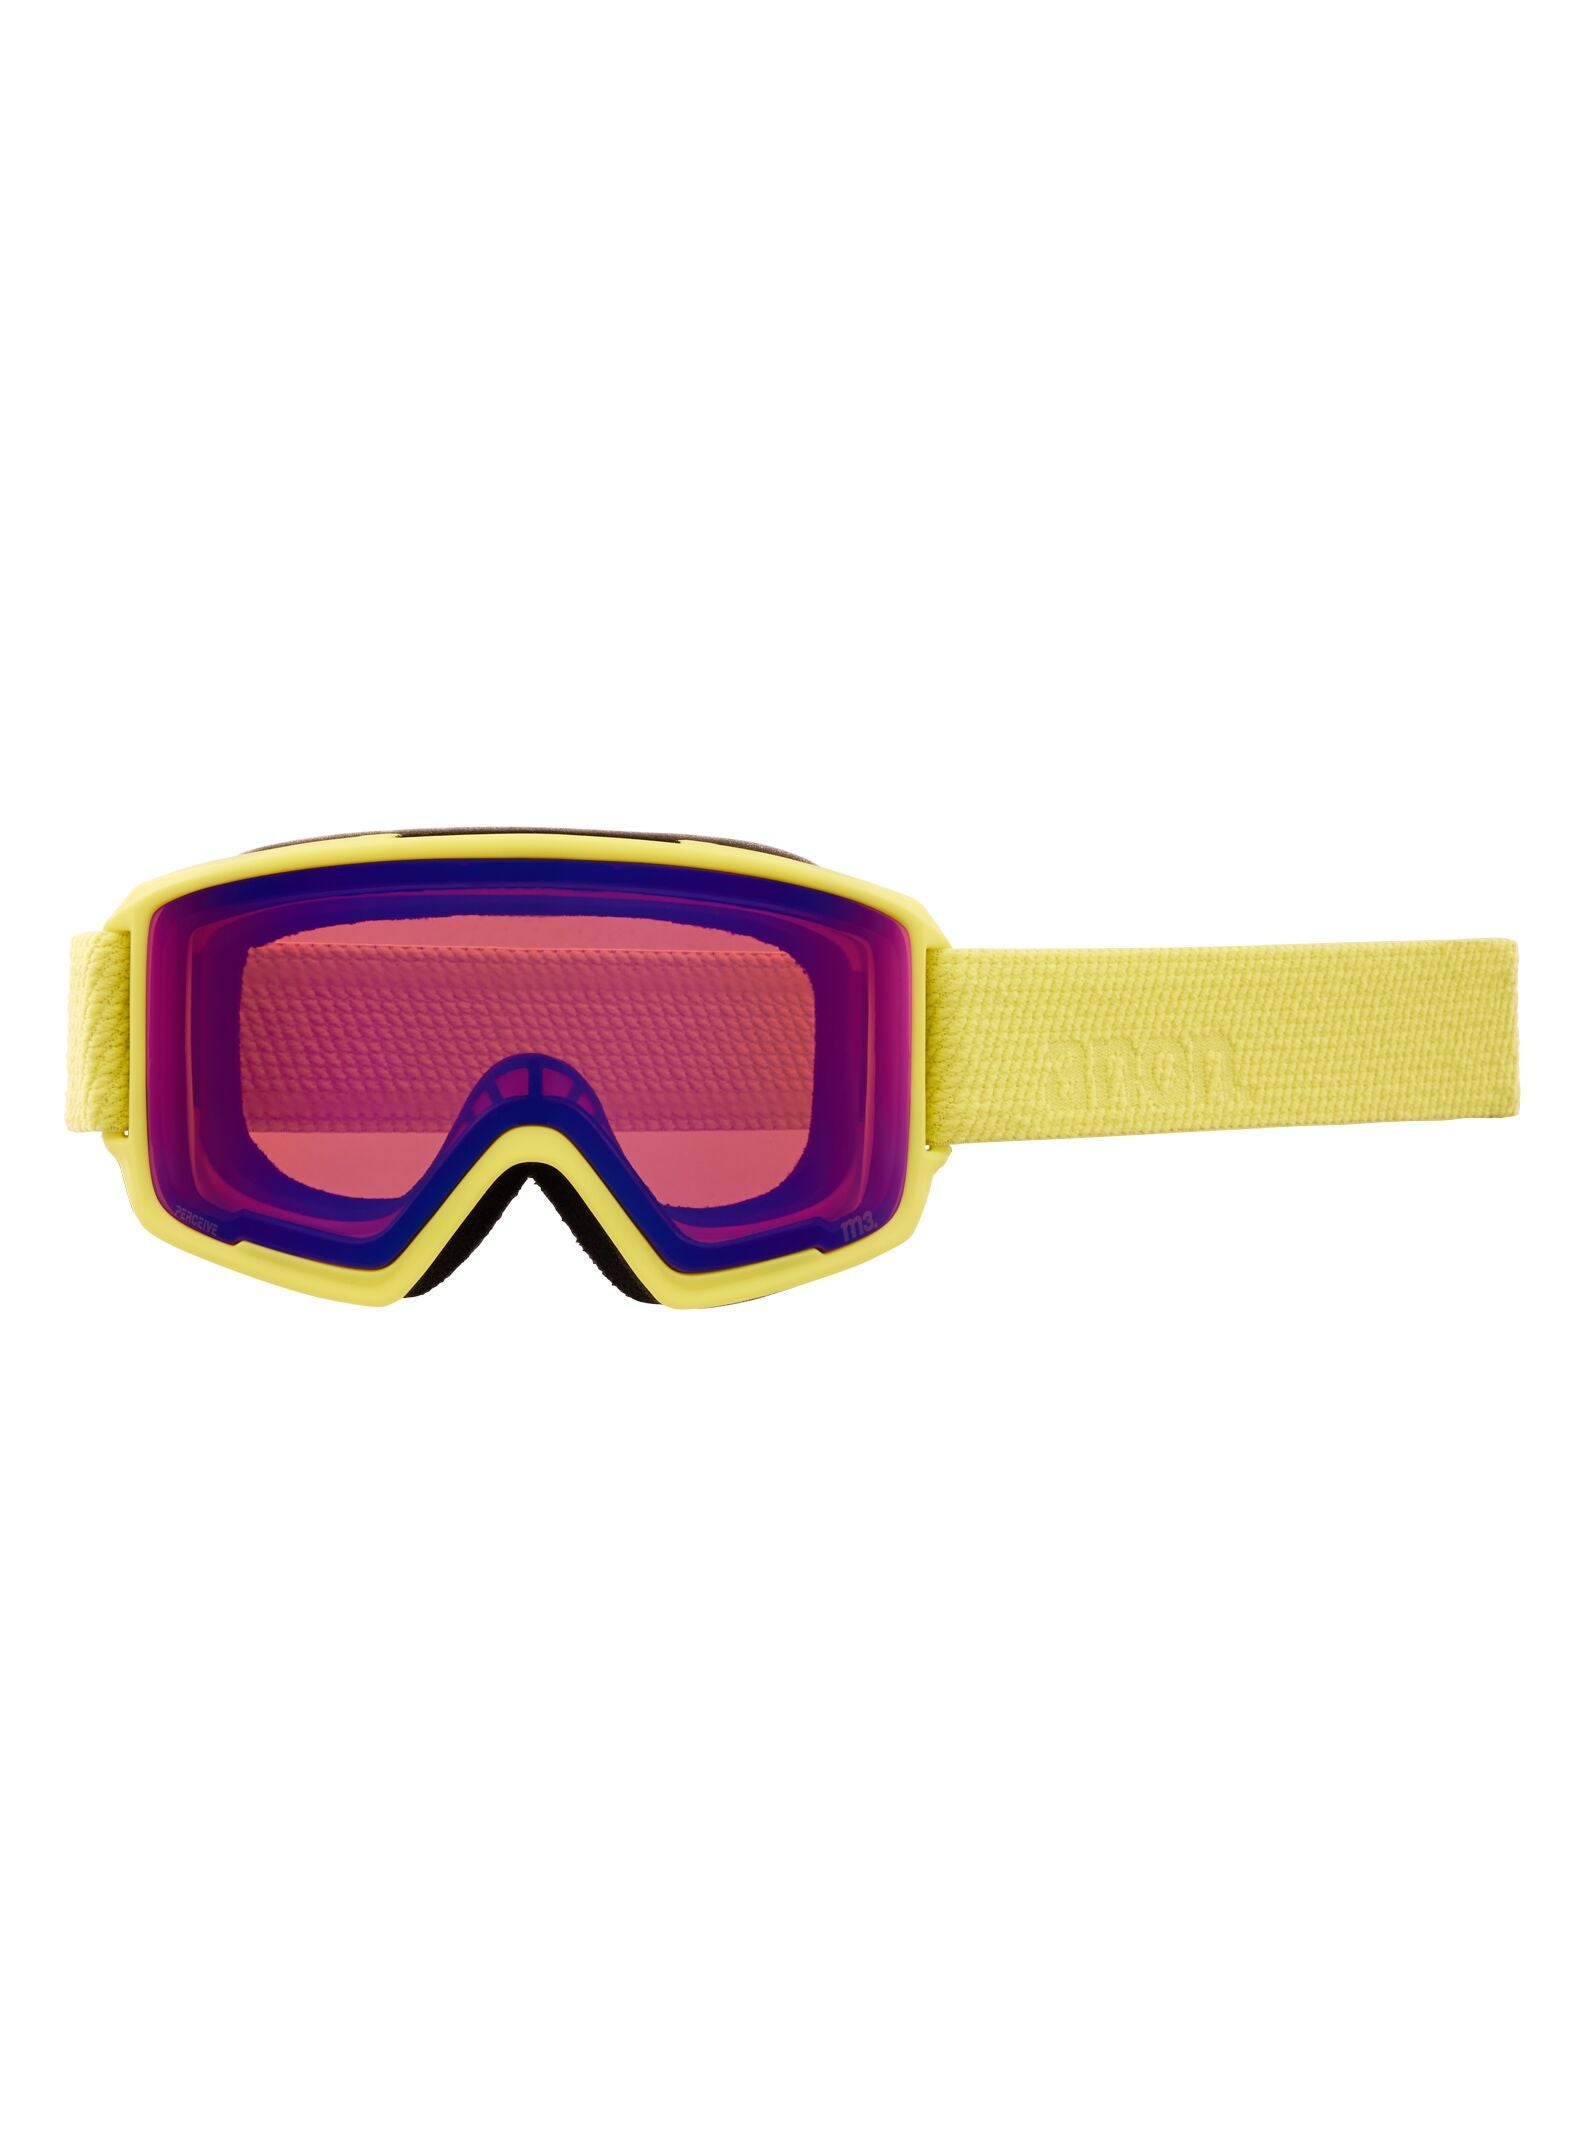 ANON M3 Lemon - Perceive Sunny Onyx + Perceive Variable Violet + MFI Face Mask Snow Goggles Snow Goggles Anon 